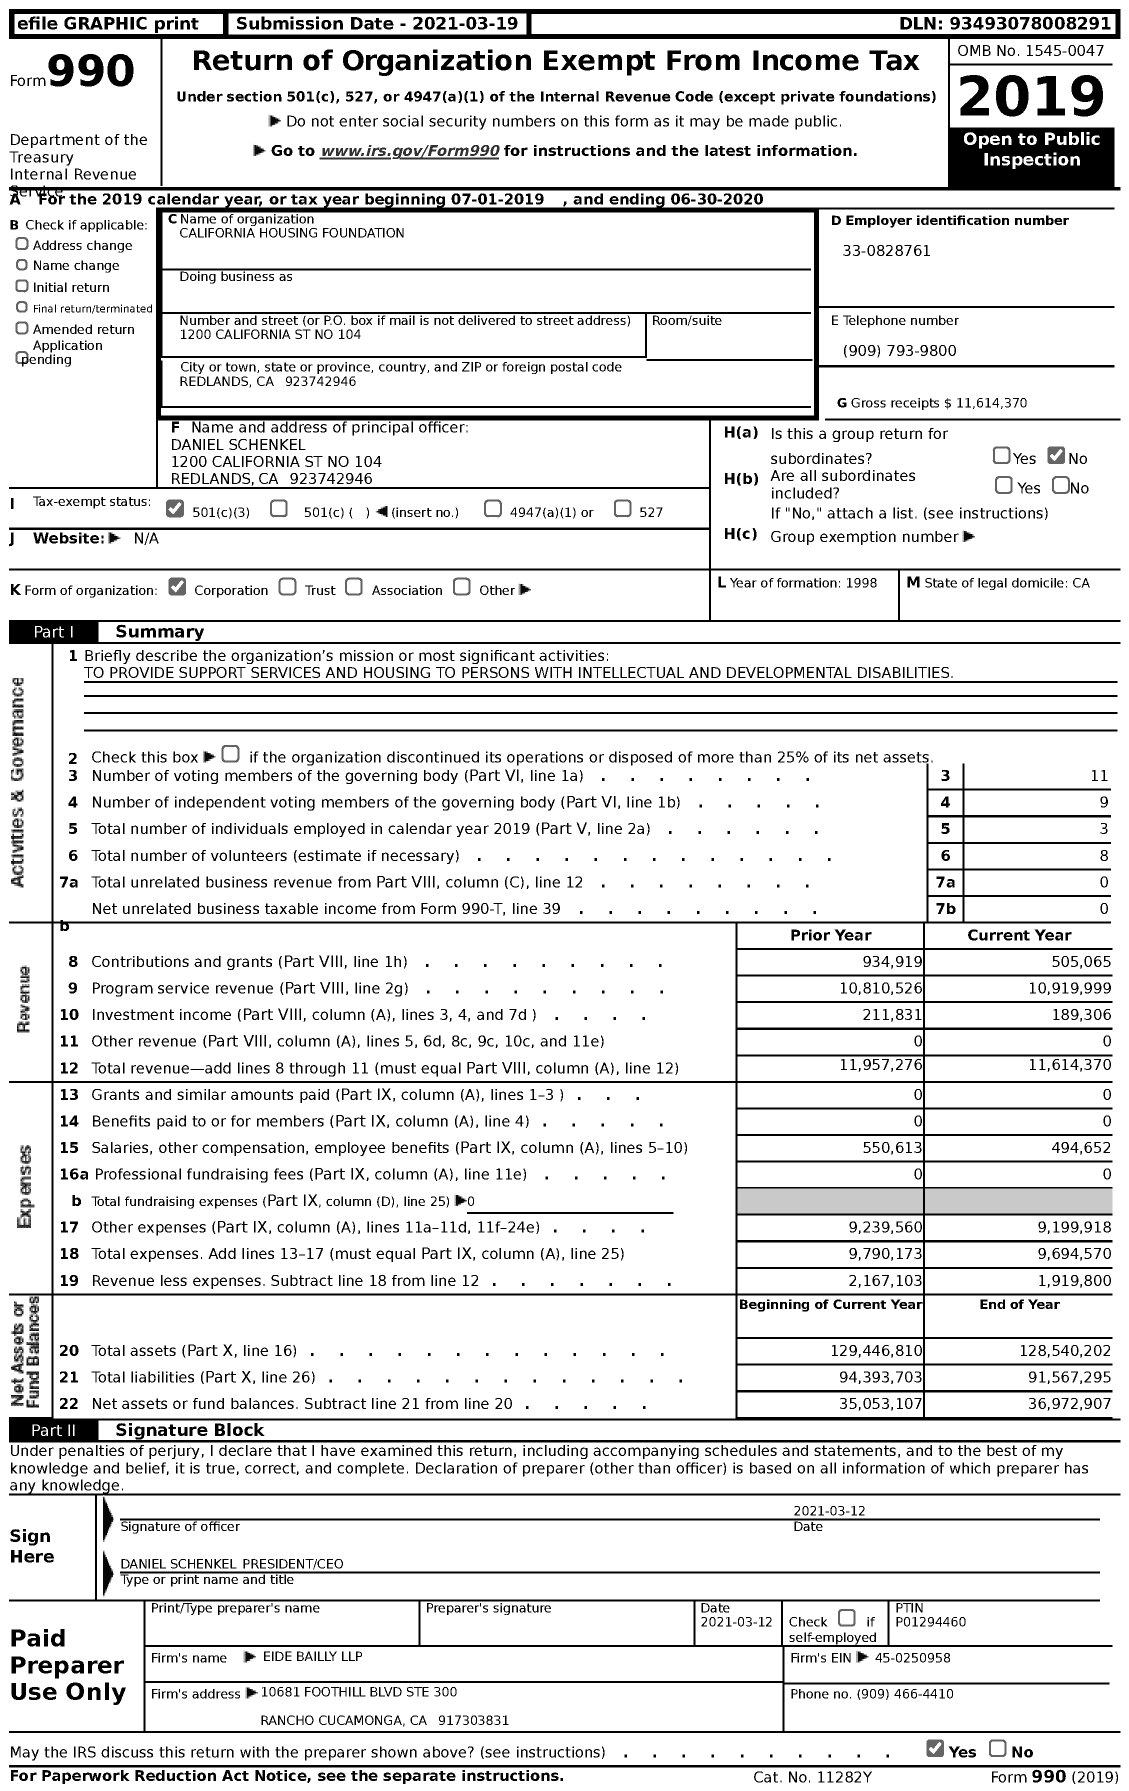 Image of first page of 2019 Form 990 for California Housing Foundation (CHF)